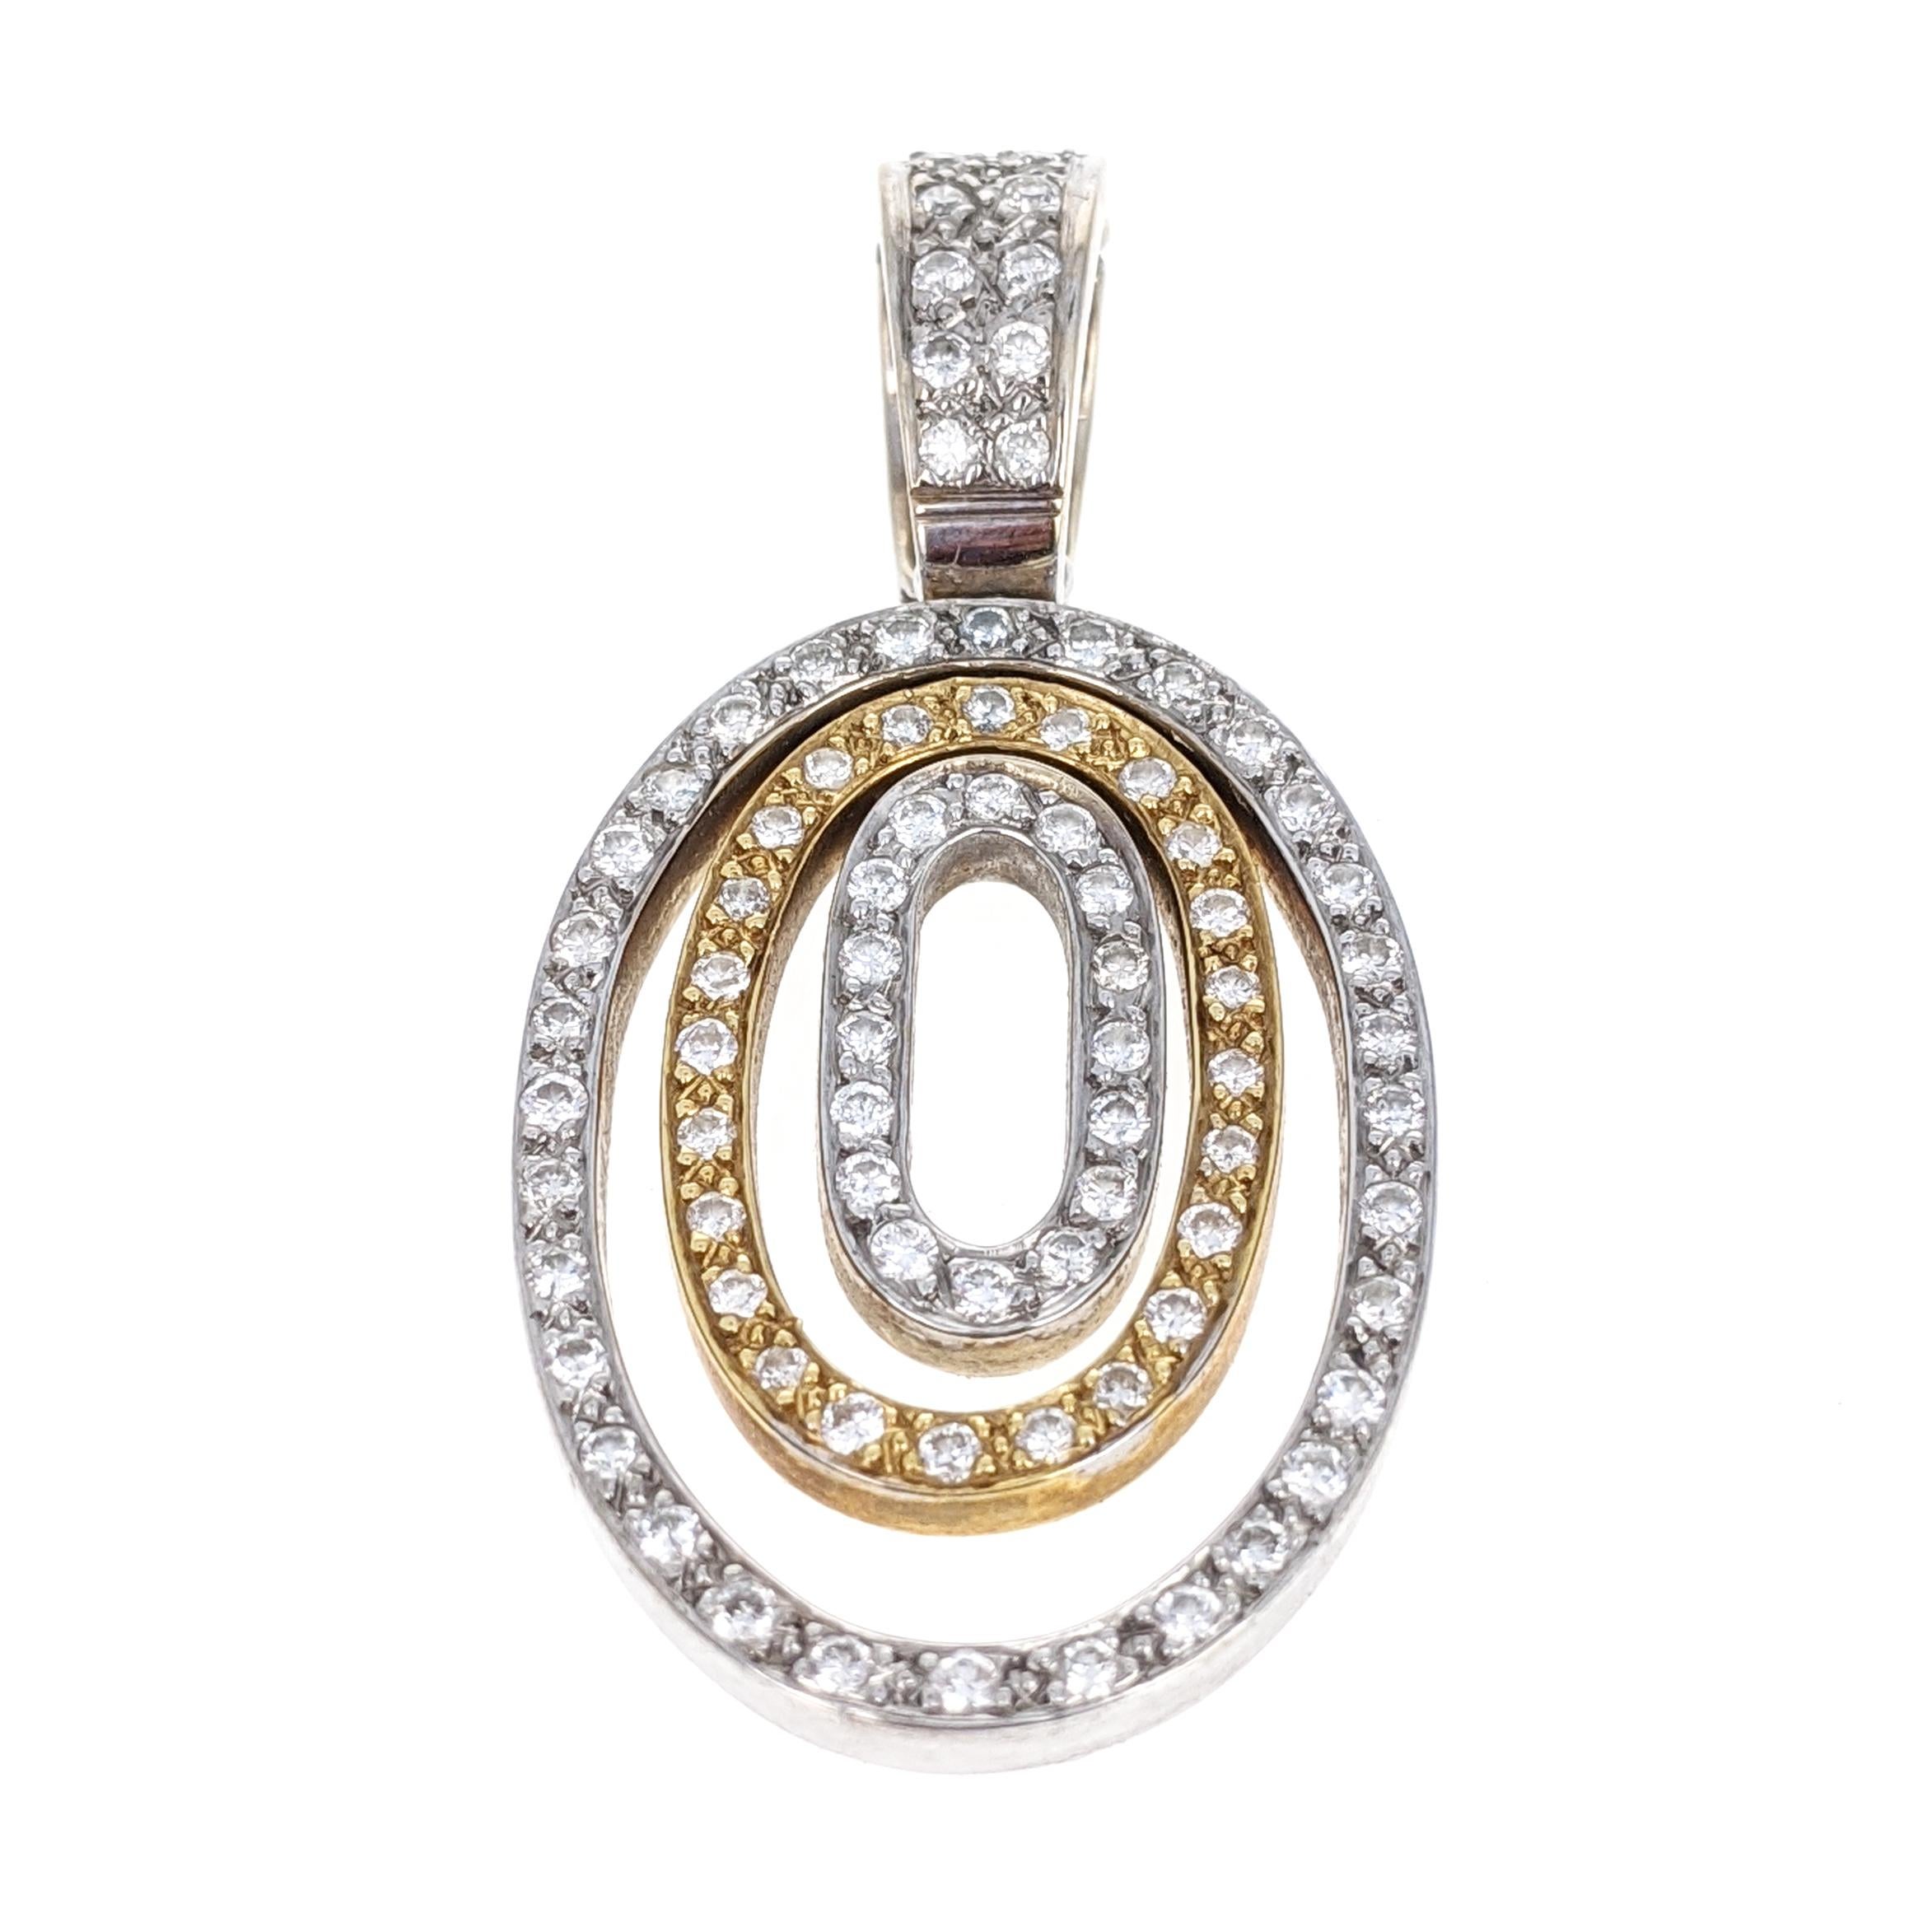 This pendant features three oval drops of alternating 18 karat white and yellow gold. It is pave-set throughout with round brilliant-cut diamonds weighing approximately .8 carat total. It is marked 18k and measures approximately 1.63 inches long by